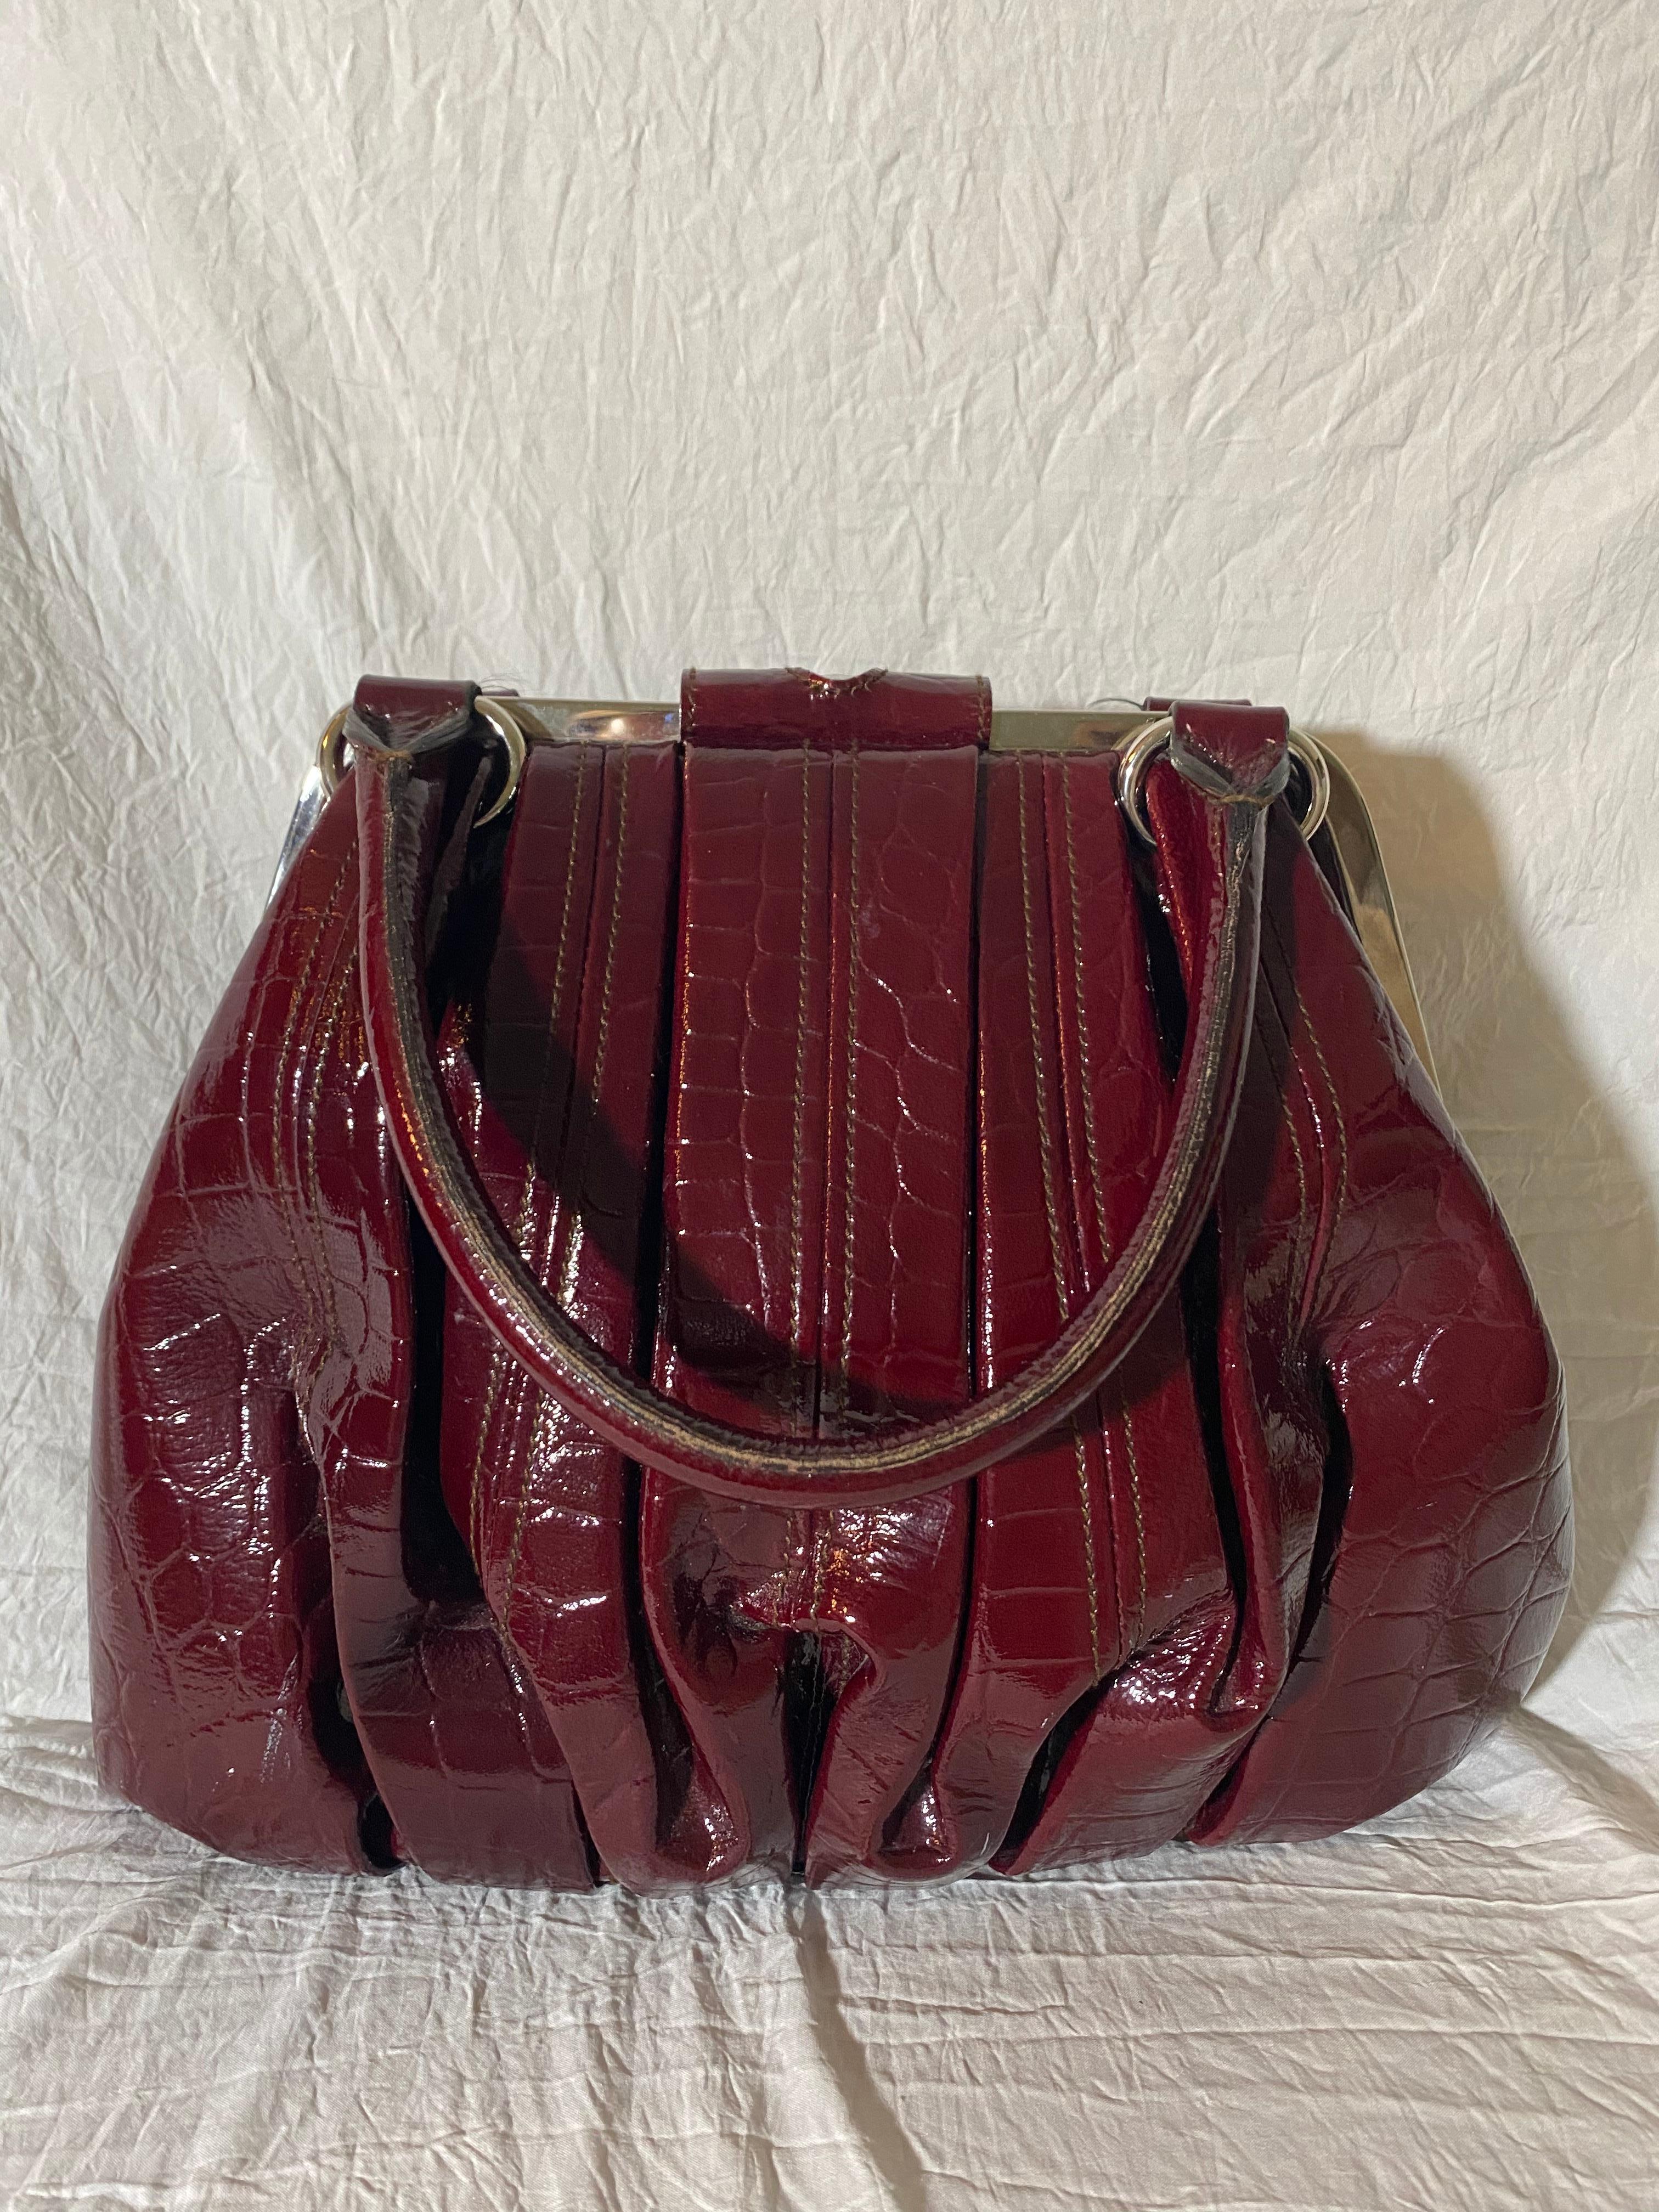 Soft patent crocodile leather laid into structured pleats, silver-tone hardware and a fabric interior. 

Condition: Good used condition.
Exterior: Slight tarnishing and discoloration on hardware.
Interior: Lined with fabric, one interior pocket.